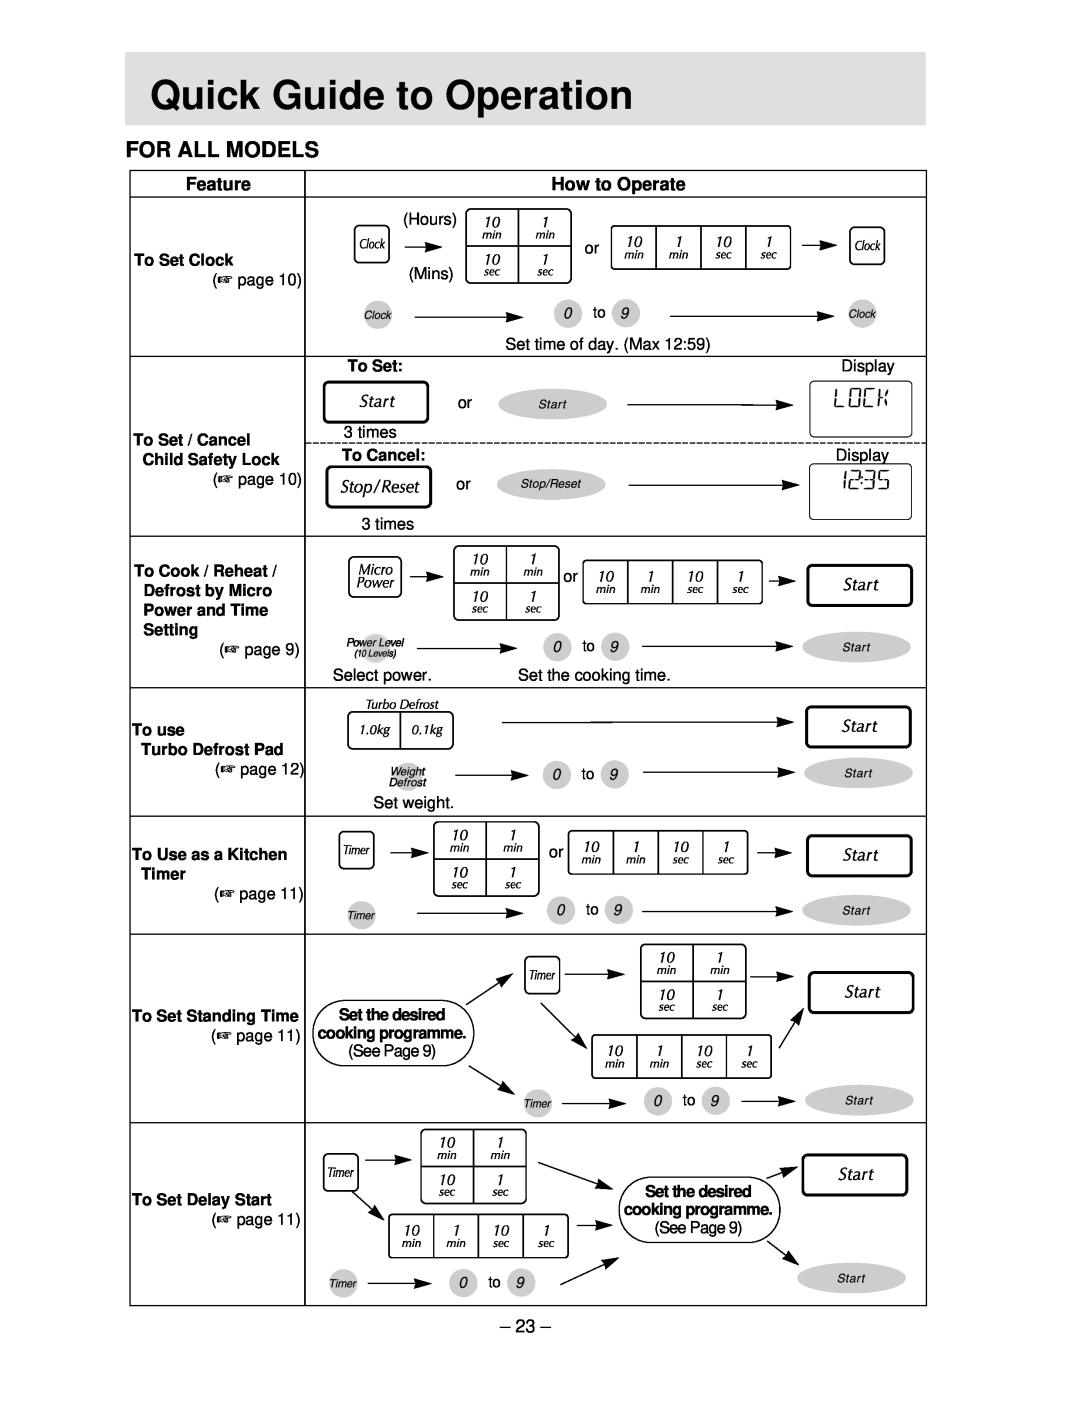 Panasonic NN-S754 manual hQuickh Guide to Operation, For All Models, Feature, How to Operate 